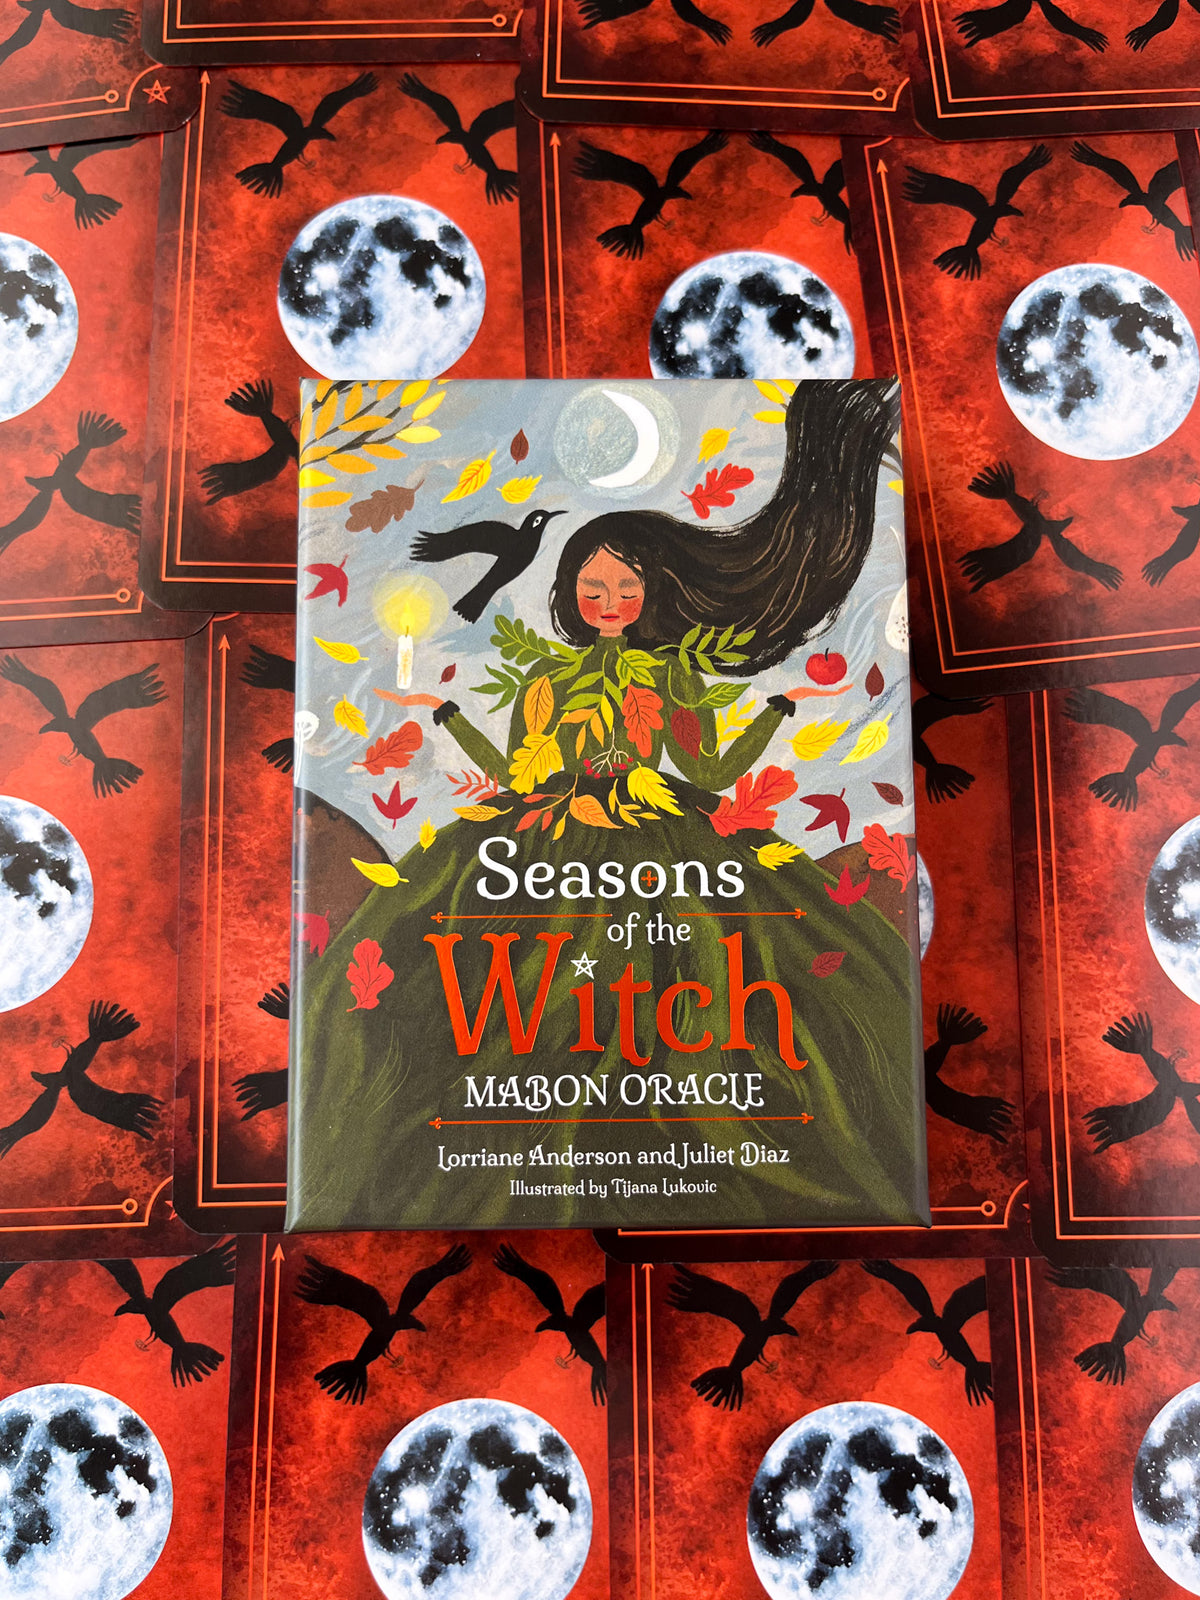 Season of the Witch - Mabon Oracle